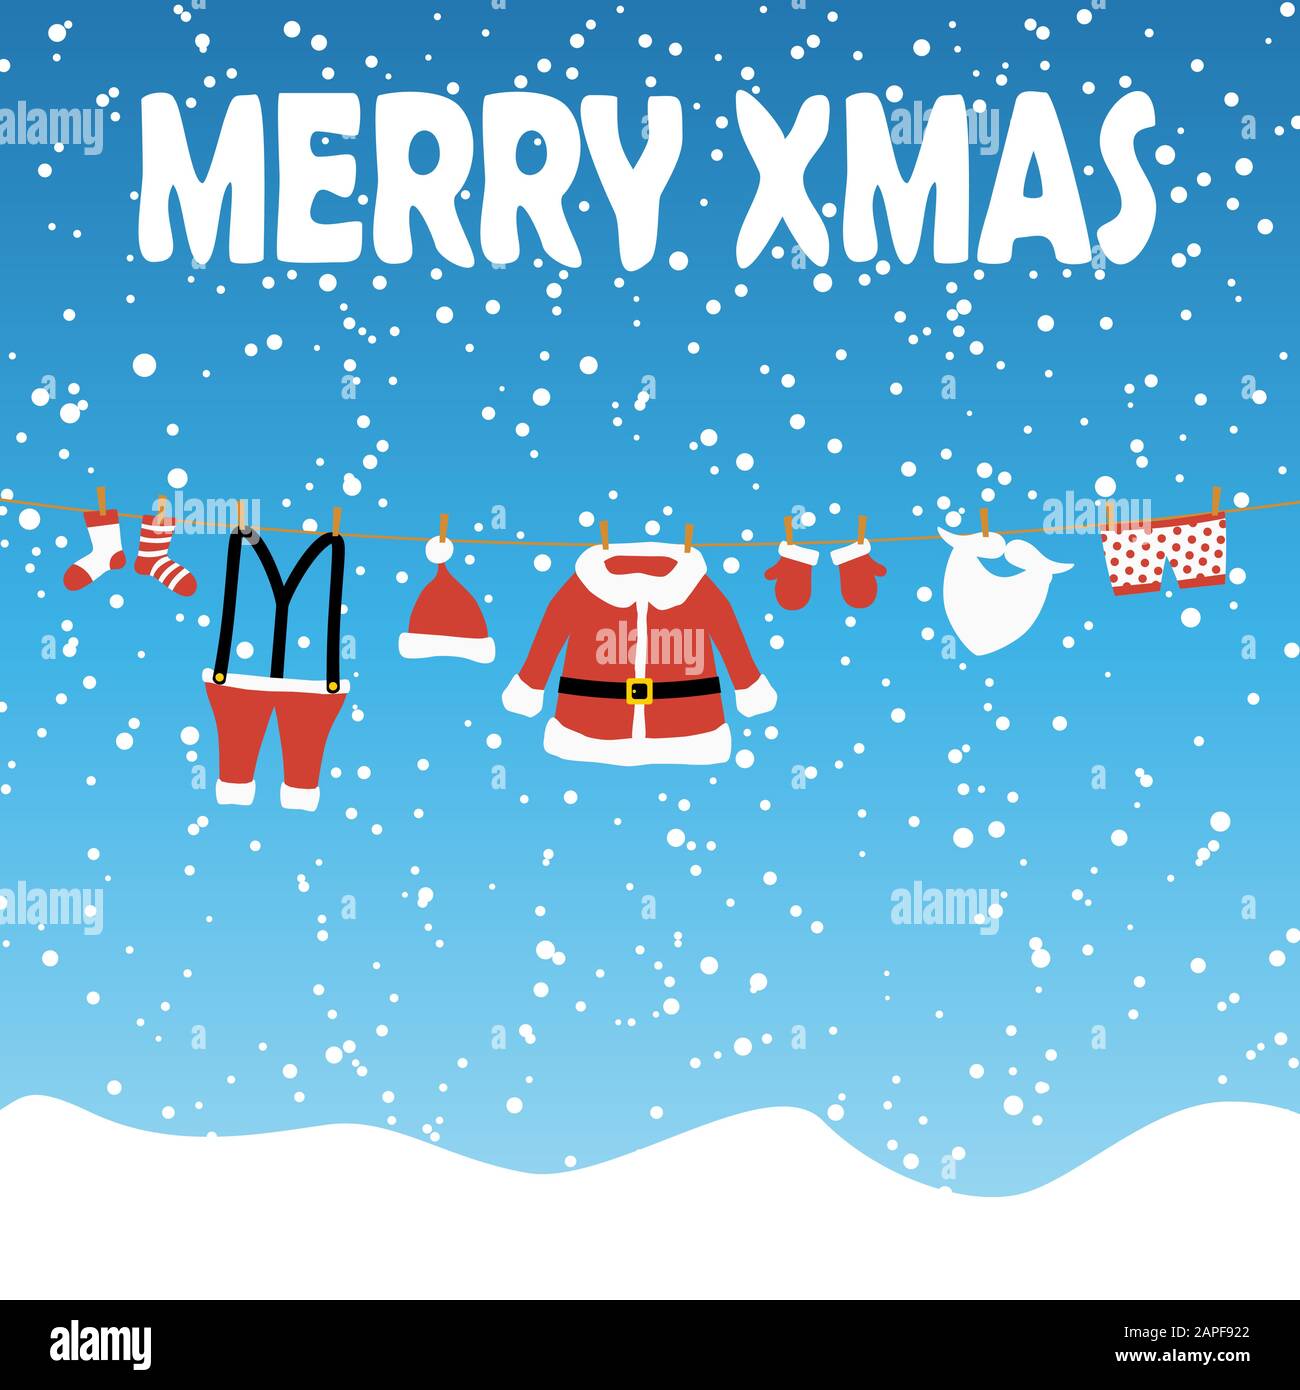 clothes from Santa Claus hanging on a clothes line, blue colored snow fall background and text Merry Xmas Stock Vector